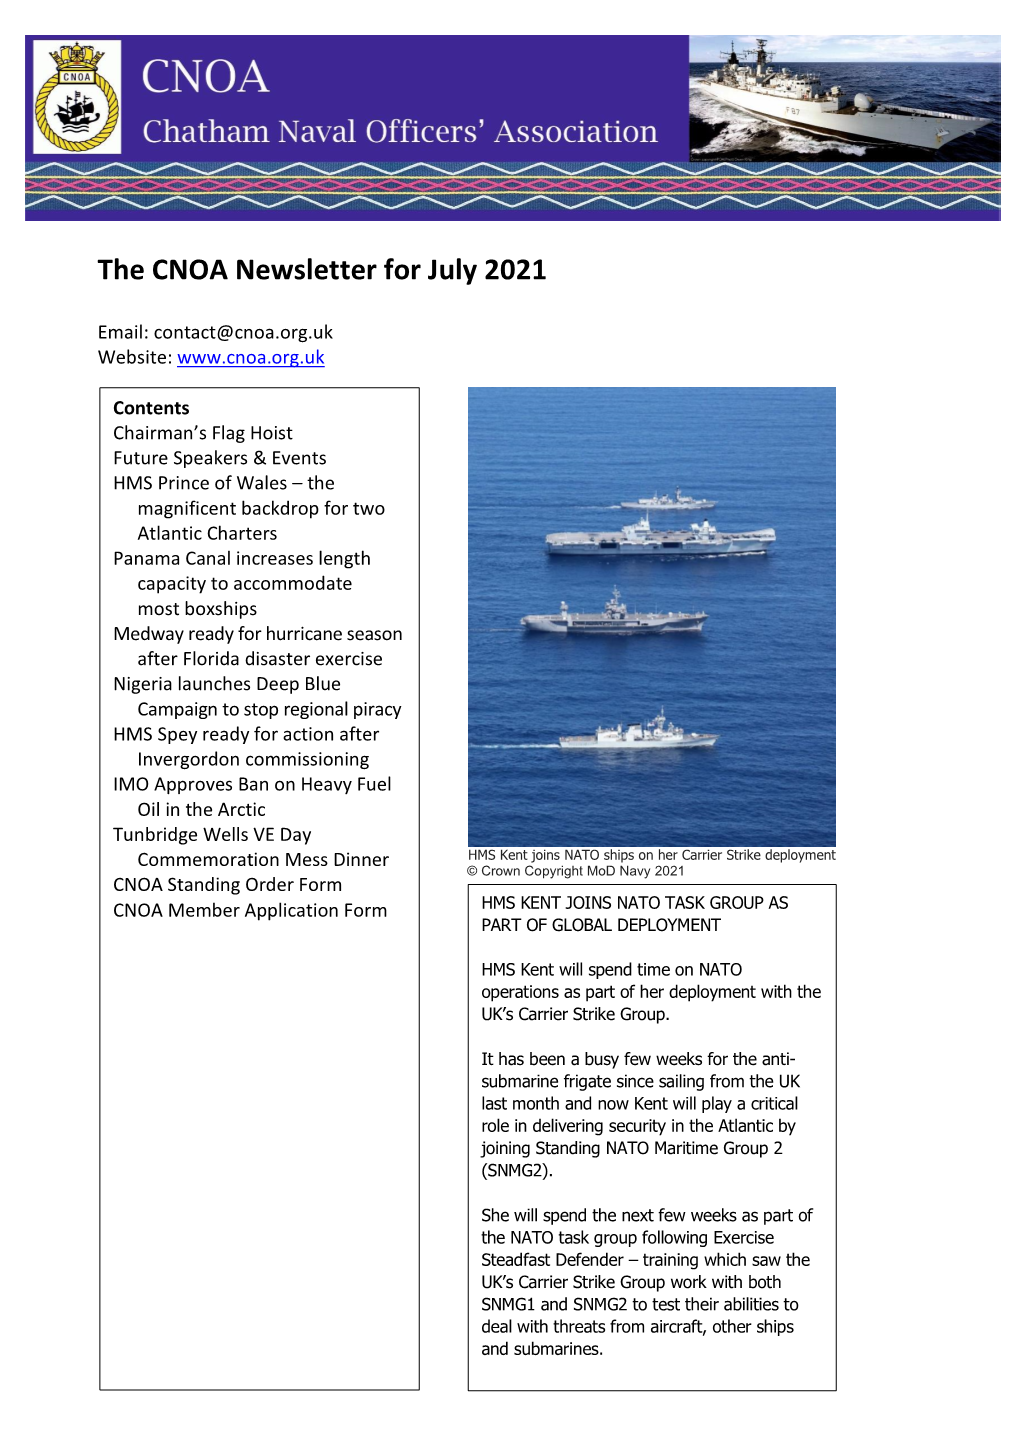 The CNOA Newsletter for July 2021